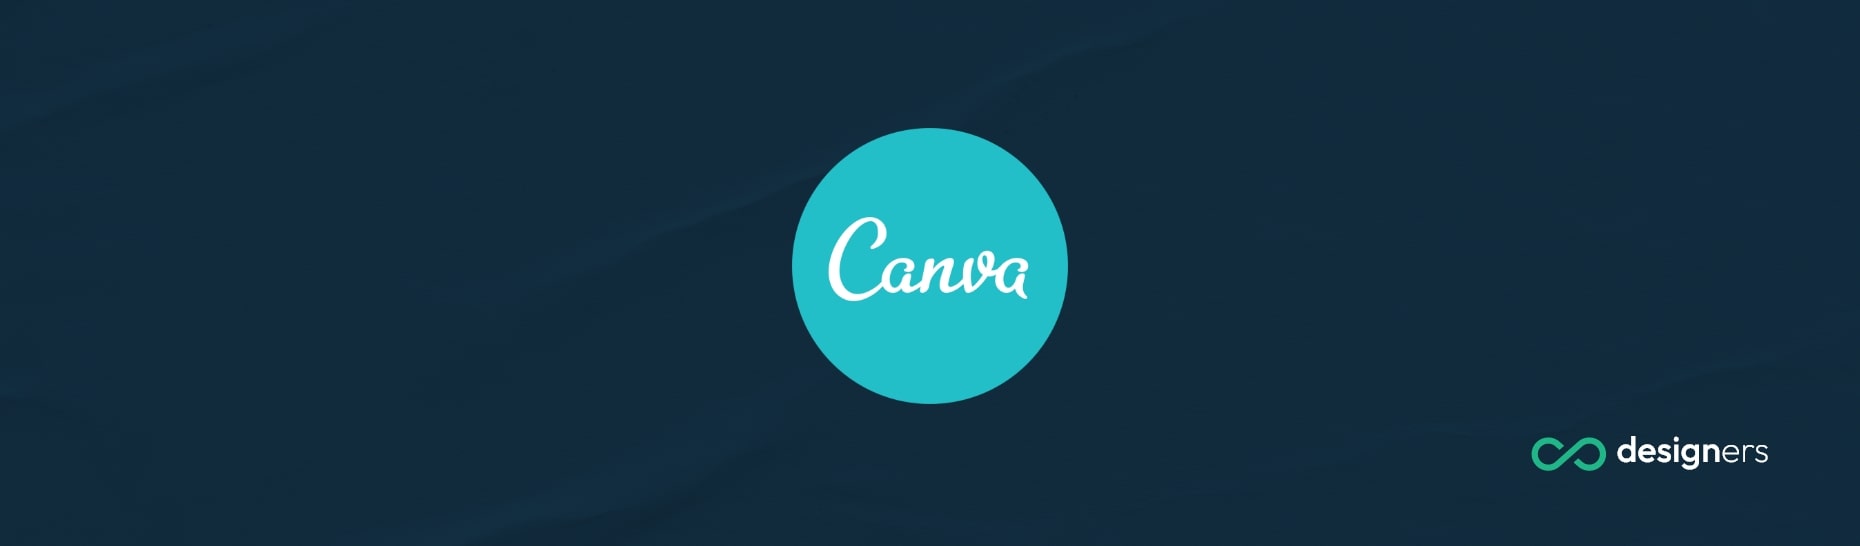 How Do I Overlay Images in Canva?